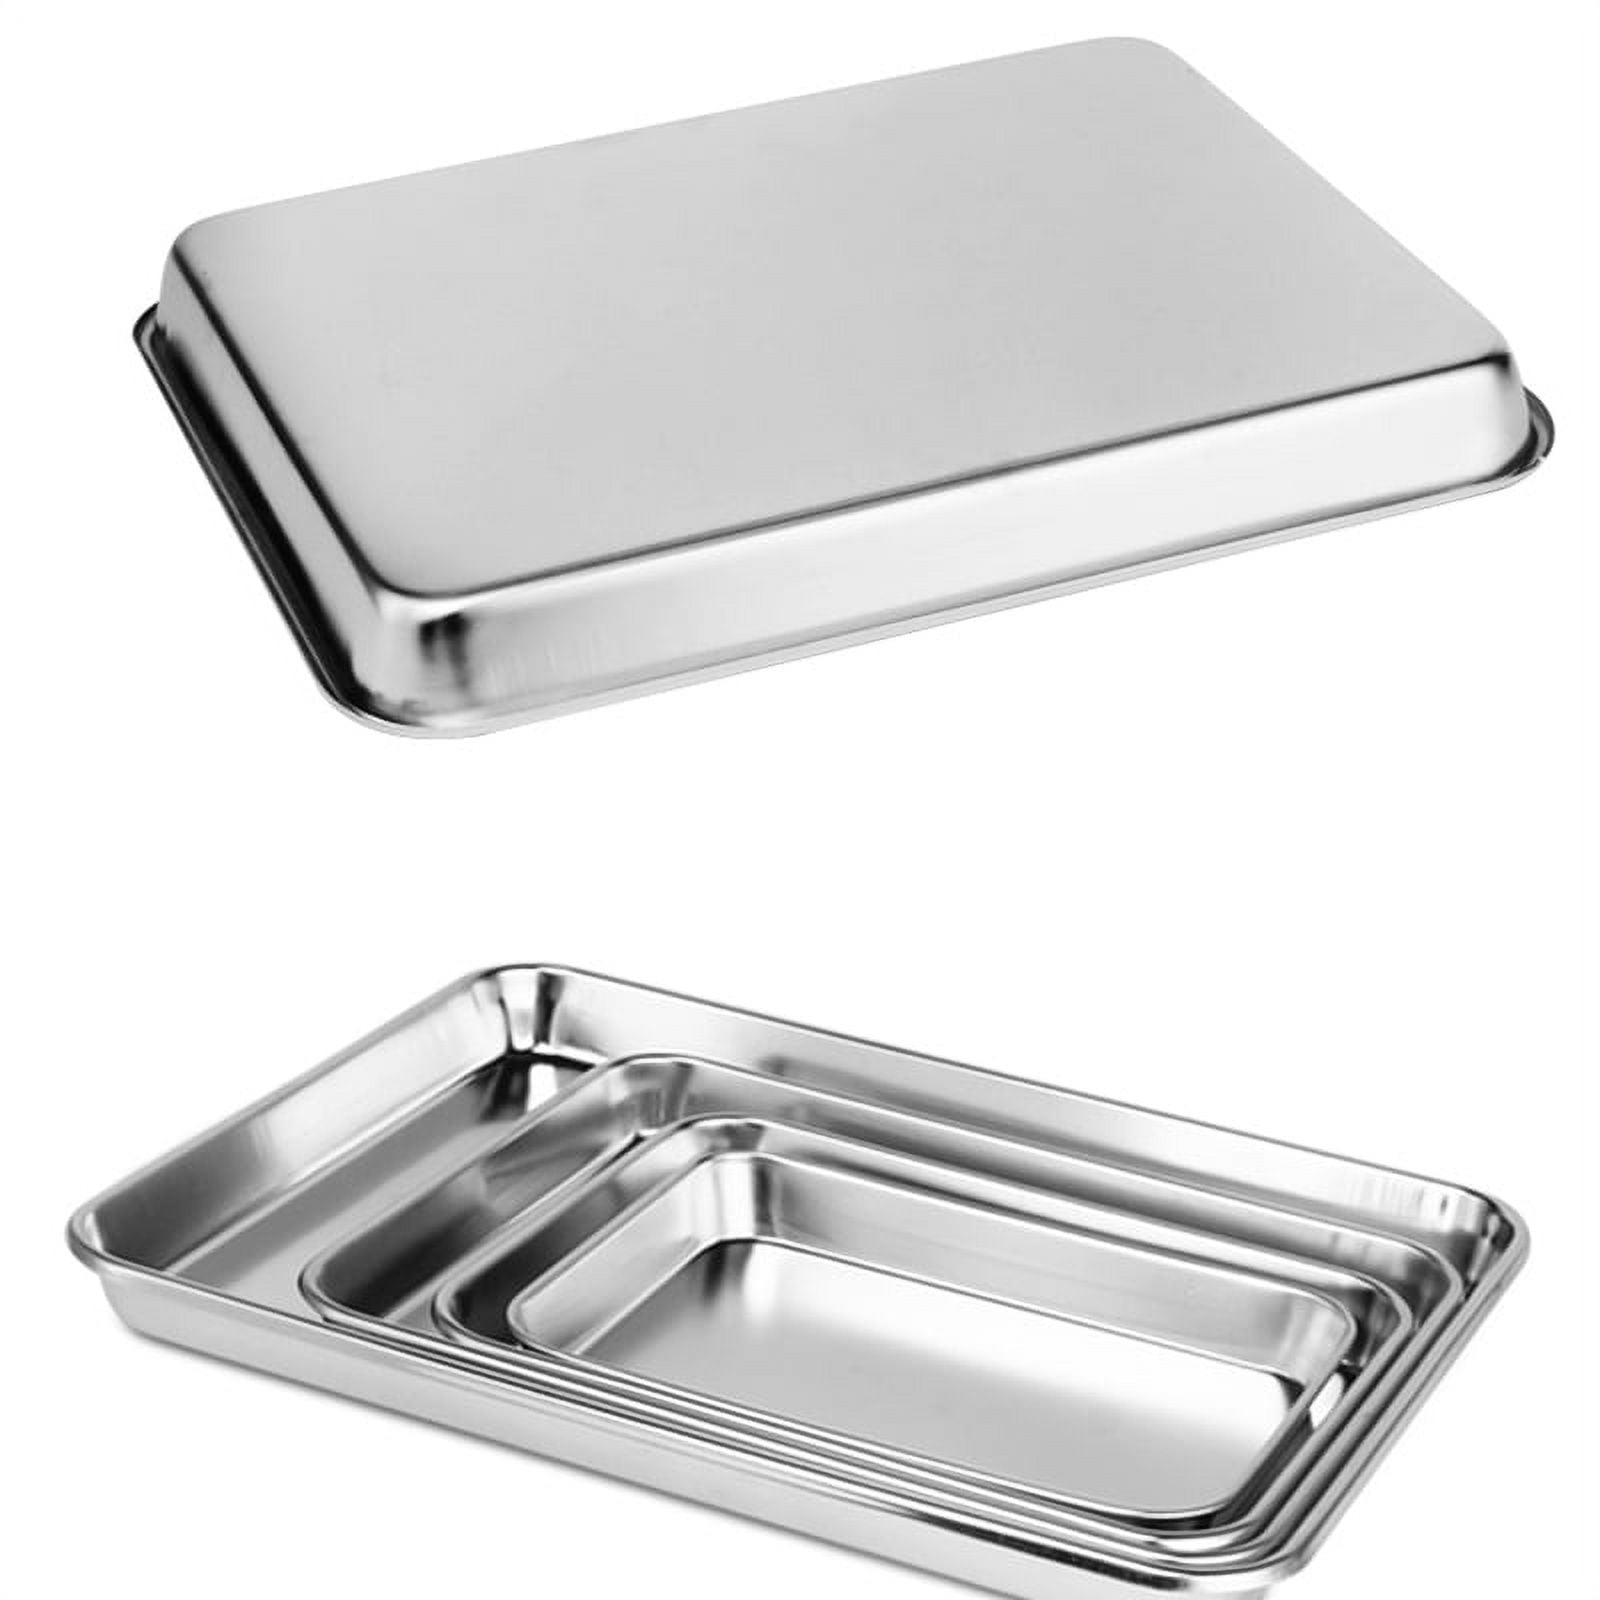 Set of 2 Baking Cookie Sheets for Oven, Healthy 304 Stainless Steel Baking  Pan, Rectangular Baking Tray, Dishwasher Safe Oven Pan 14.2 x 10.6 x0.8